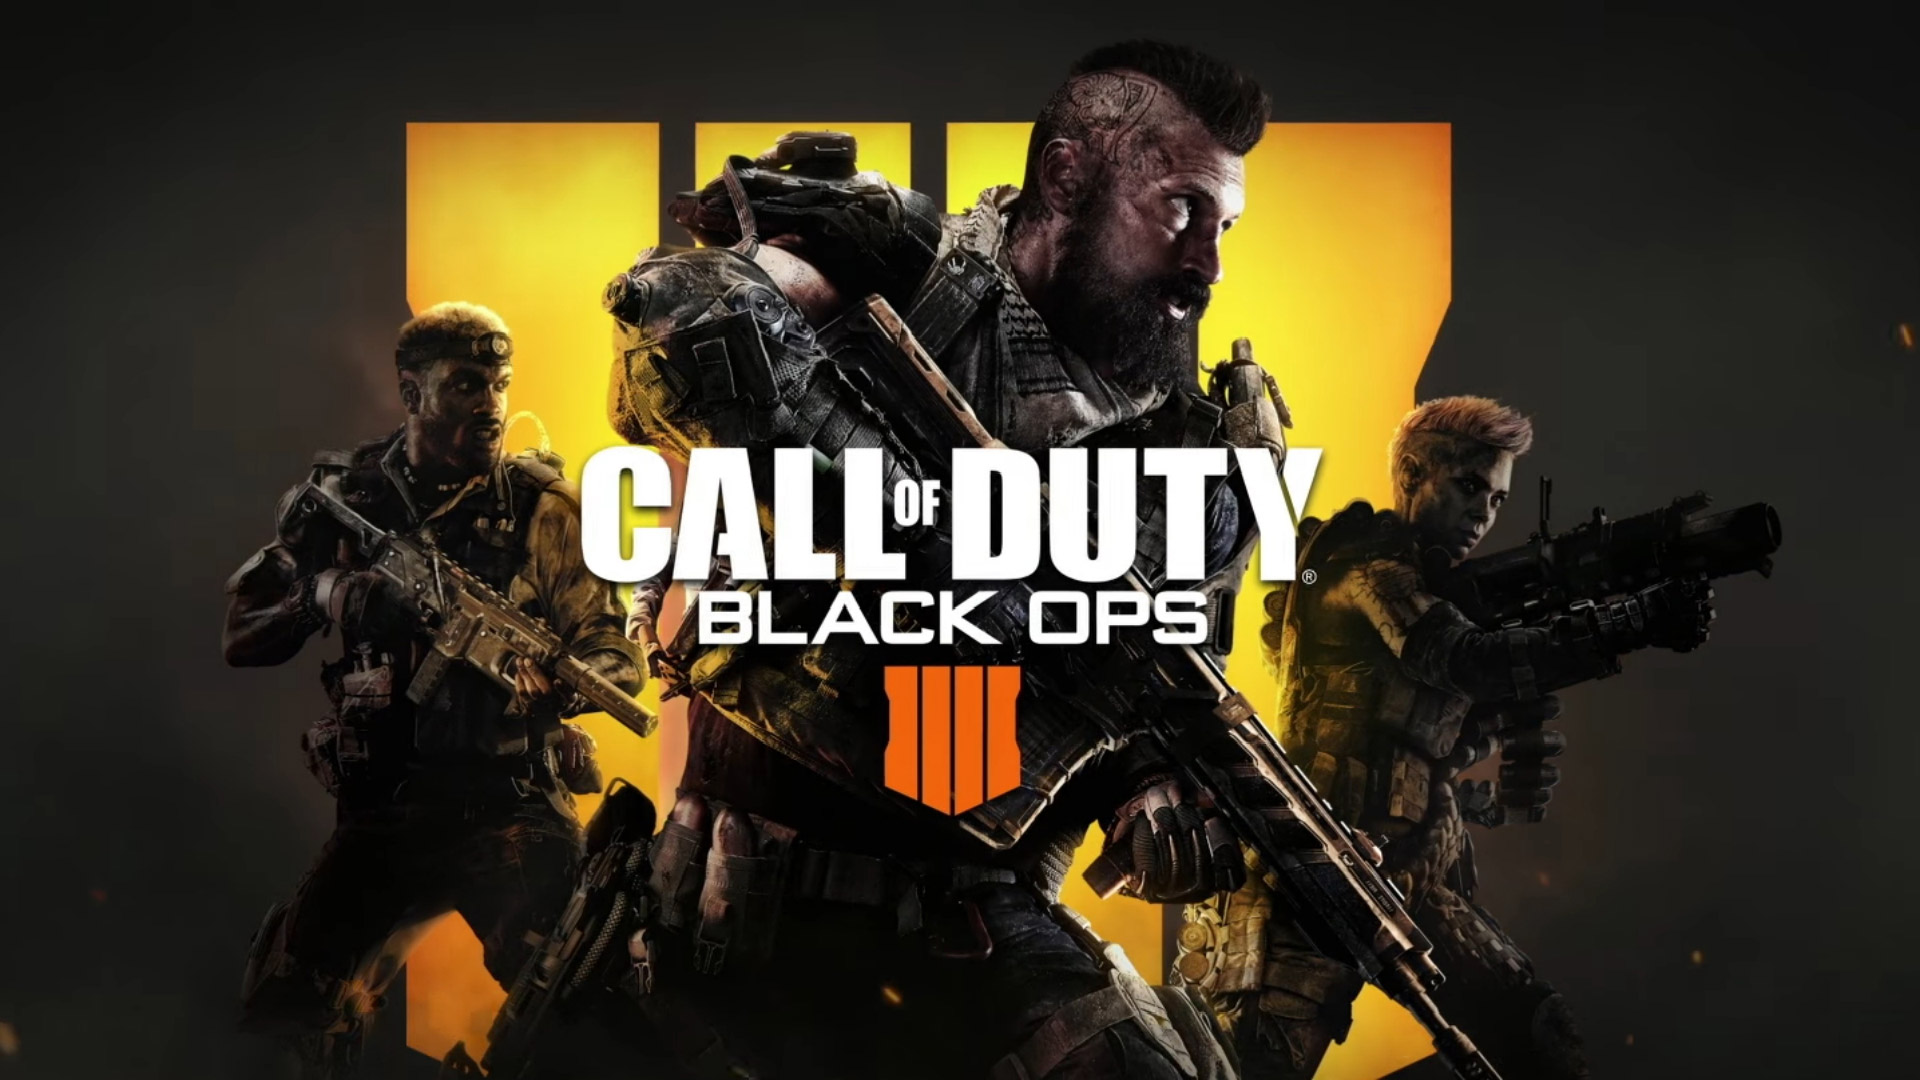 call of duty black ops 4 download